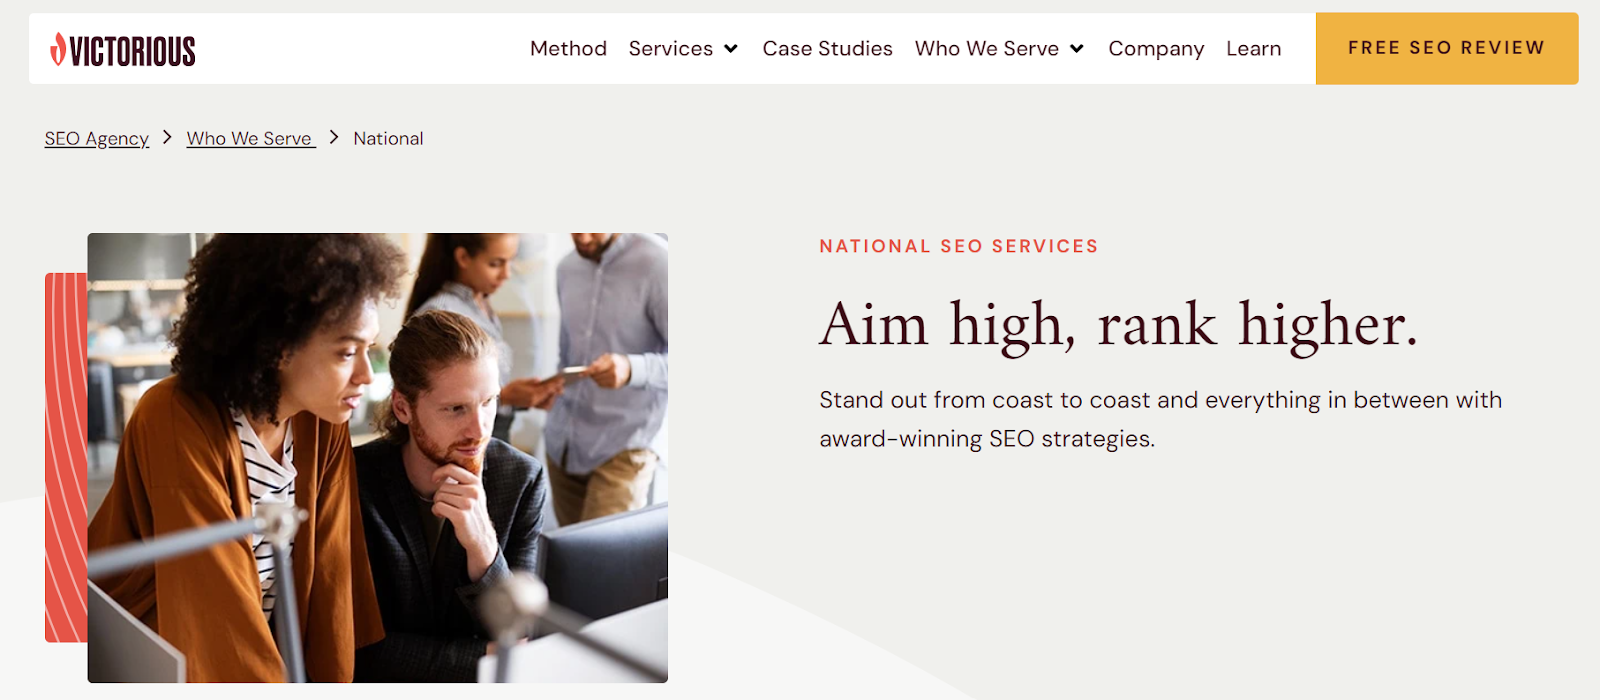 Victorious SEO listed as one of the best SEO companies for Home Services